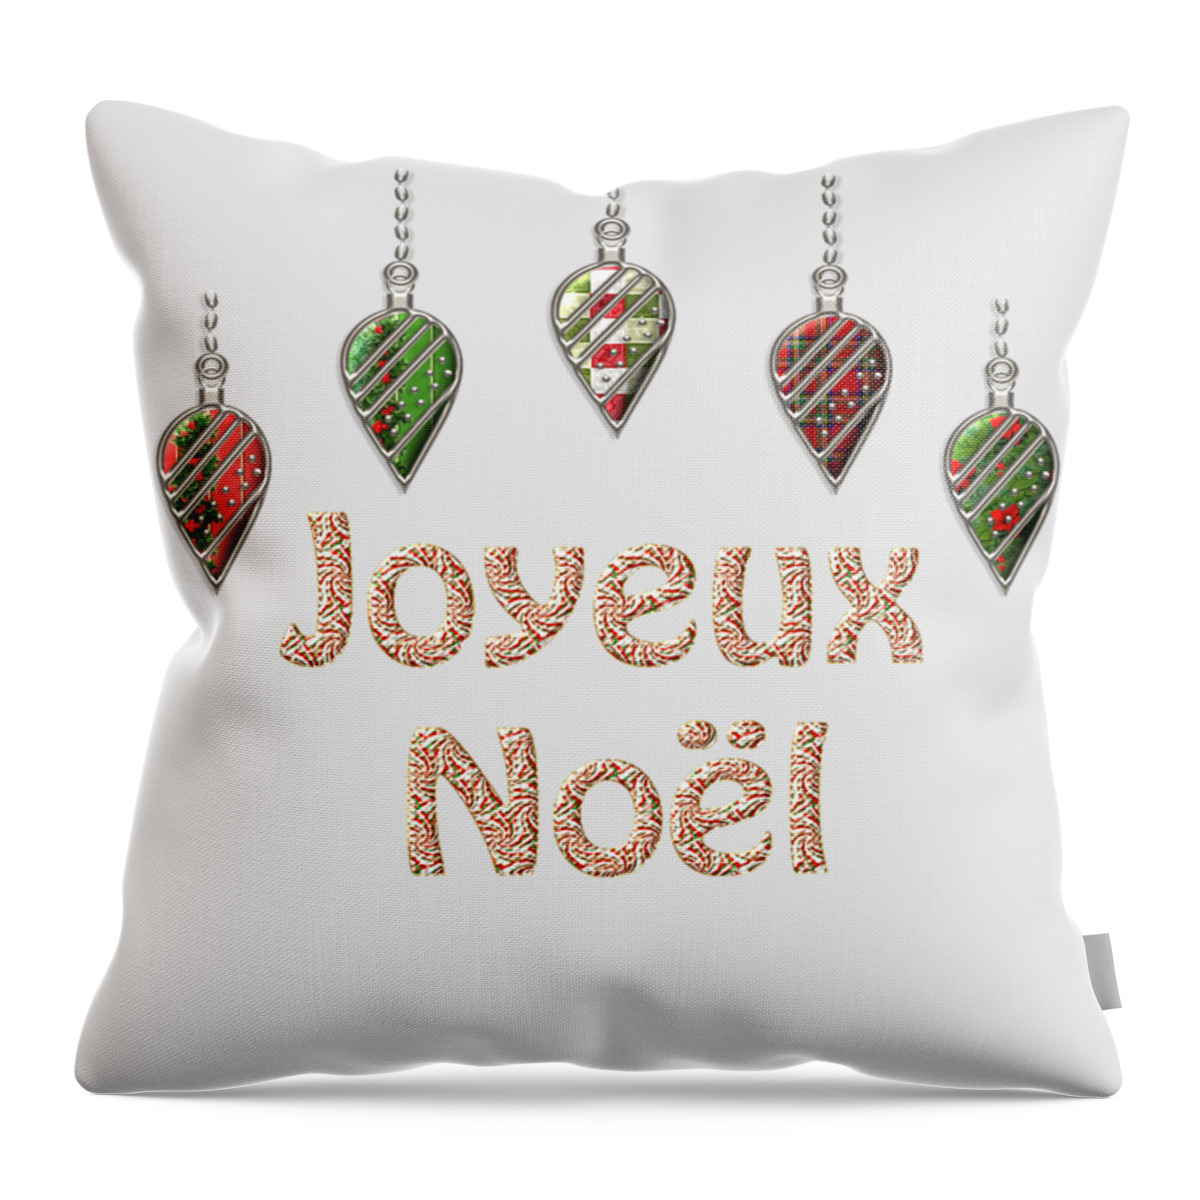 Red Throw Pillow featuring the digital art Joyeux Noel French Merry Christmas by Movie Poster Prints